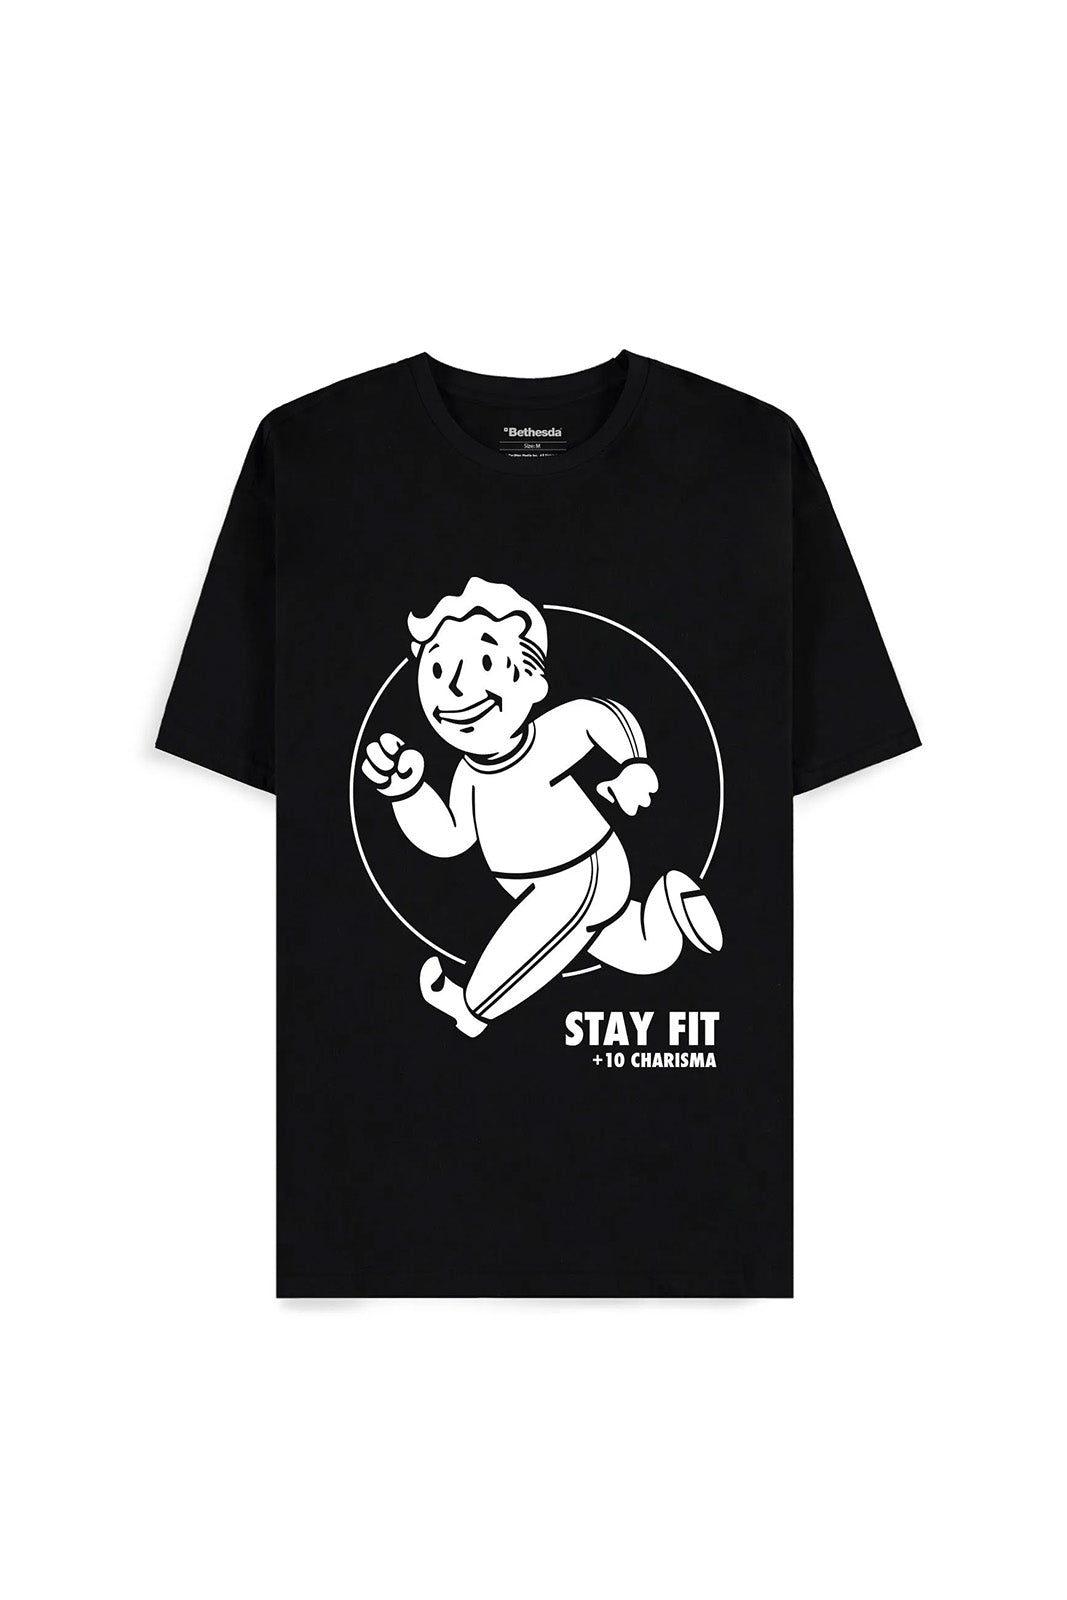 T-Shirt - Fallout 4 - Stay Fit